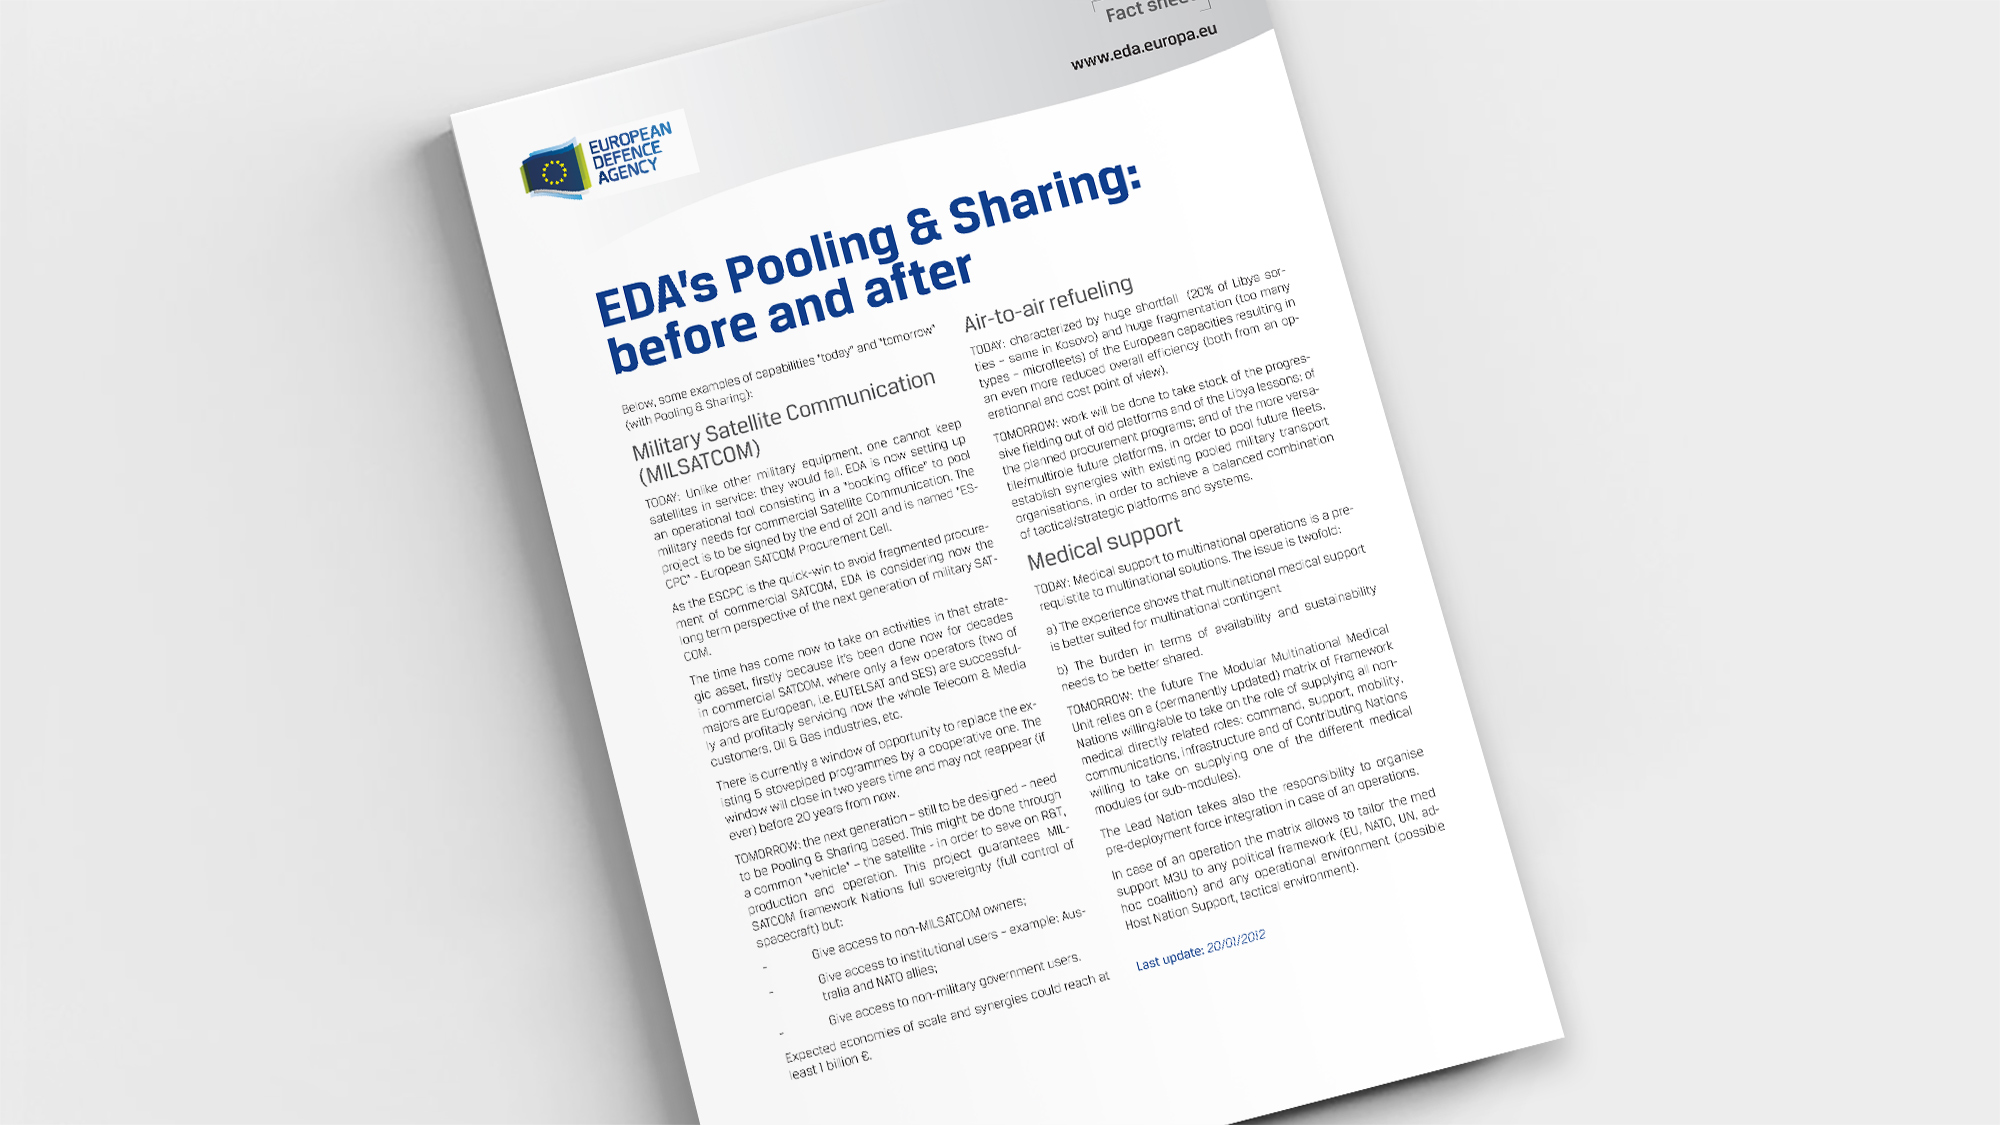 Factsheet Pooling & Sharing before and after